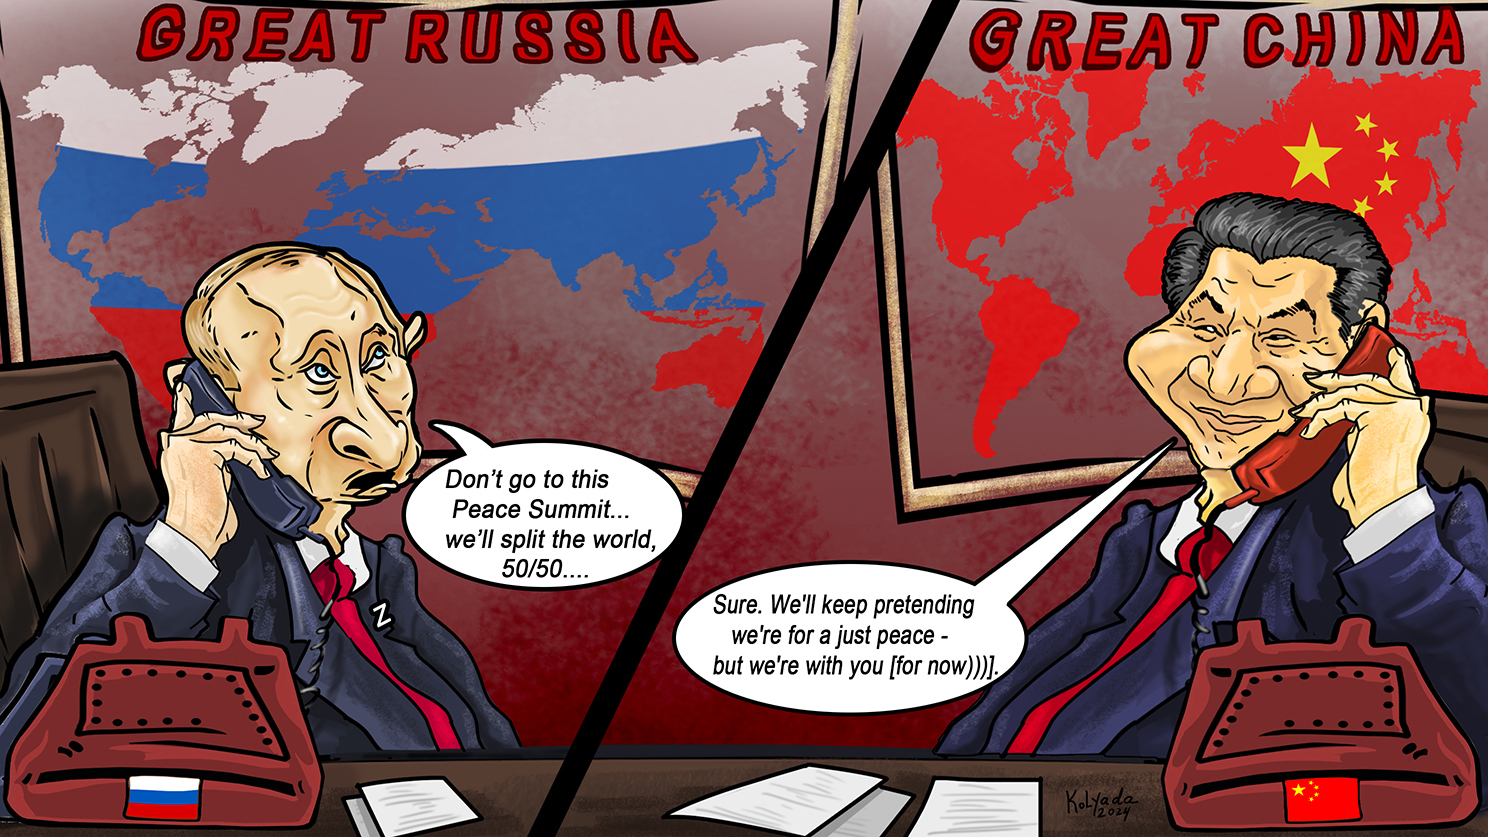 Putin's and Xi's Temporary Alliance of Convenience